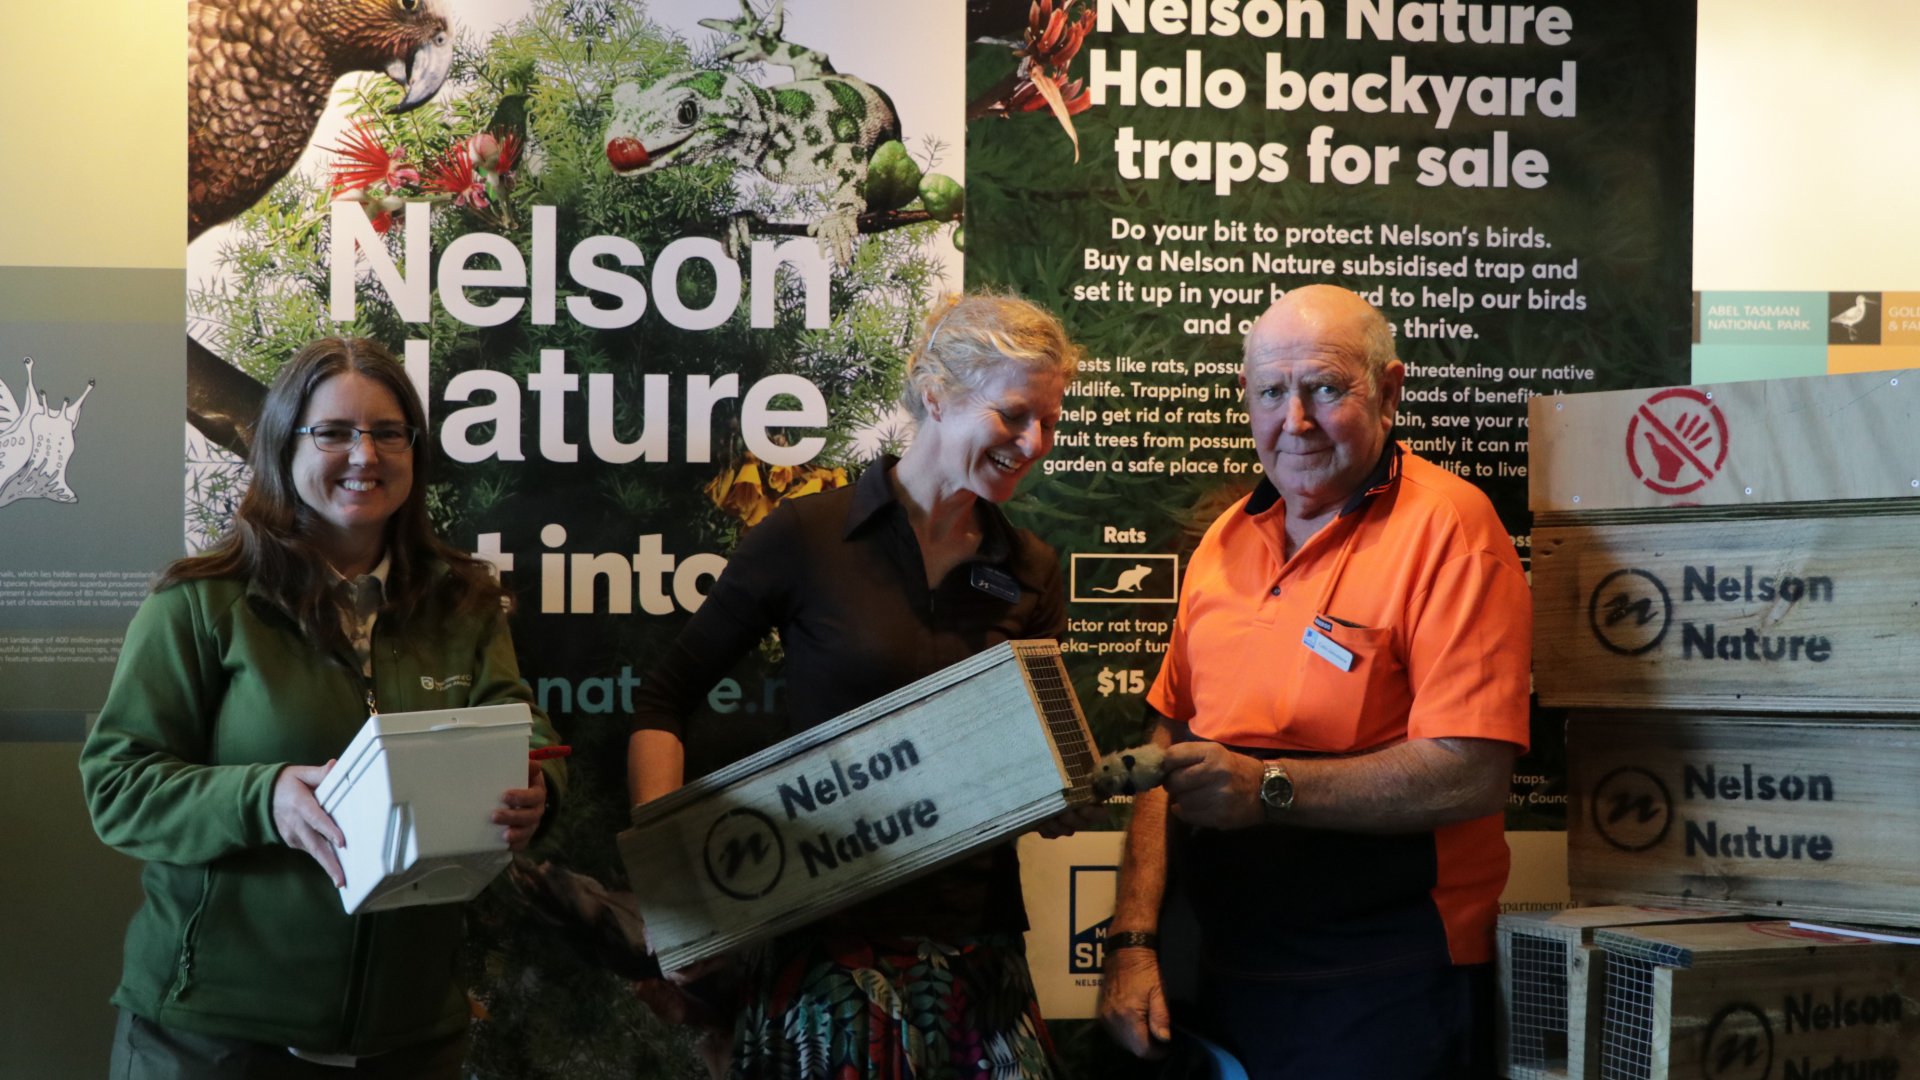 Nelson Nature subsidised traps for sale at the DOC Vistor Centre